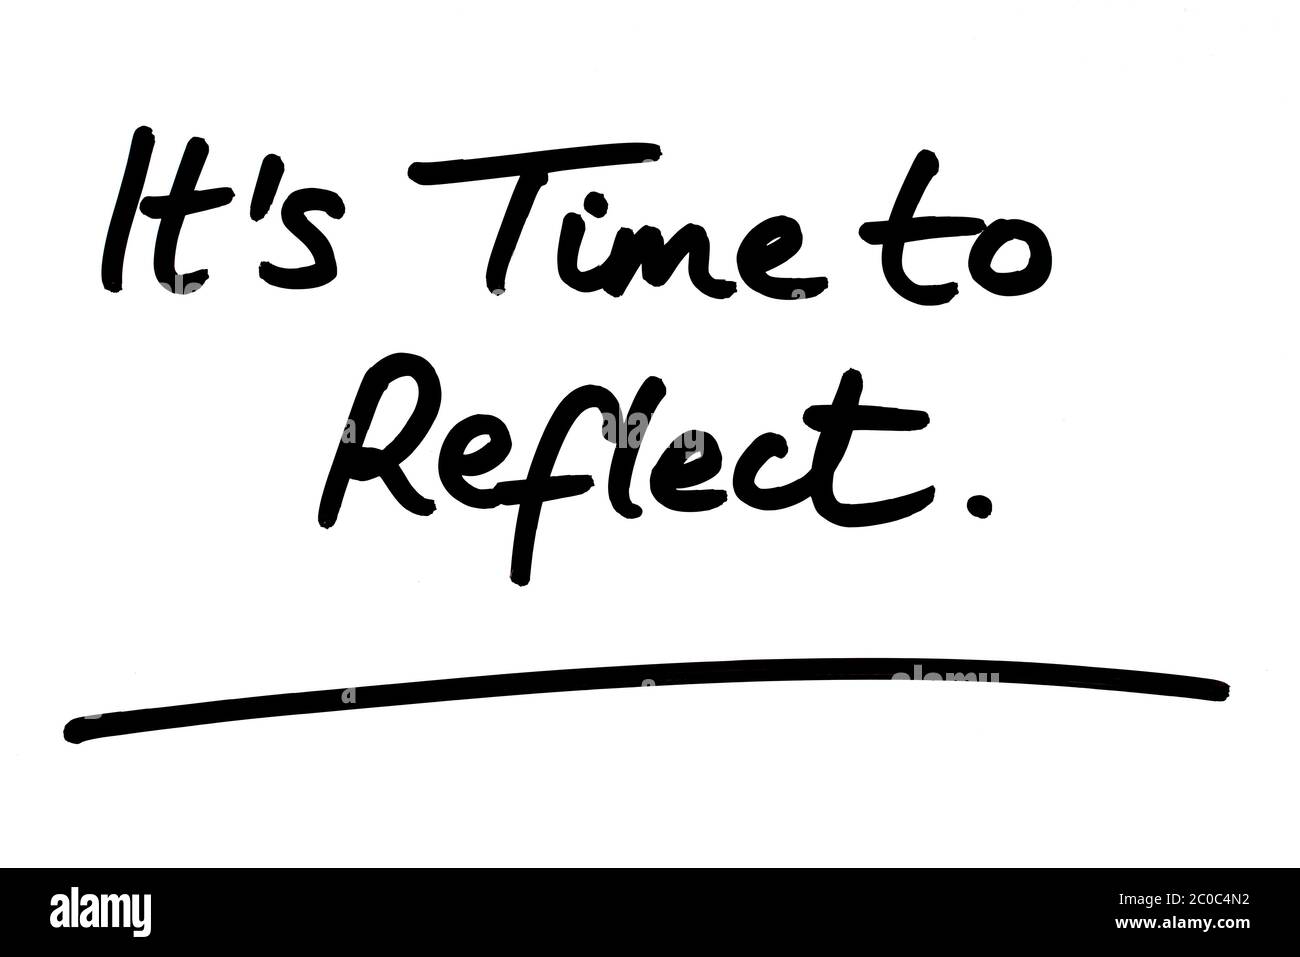 Its Time to Reflect handwritten on a white background. Stock Photo